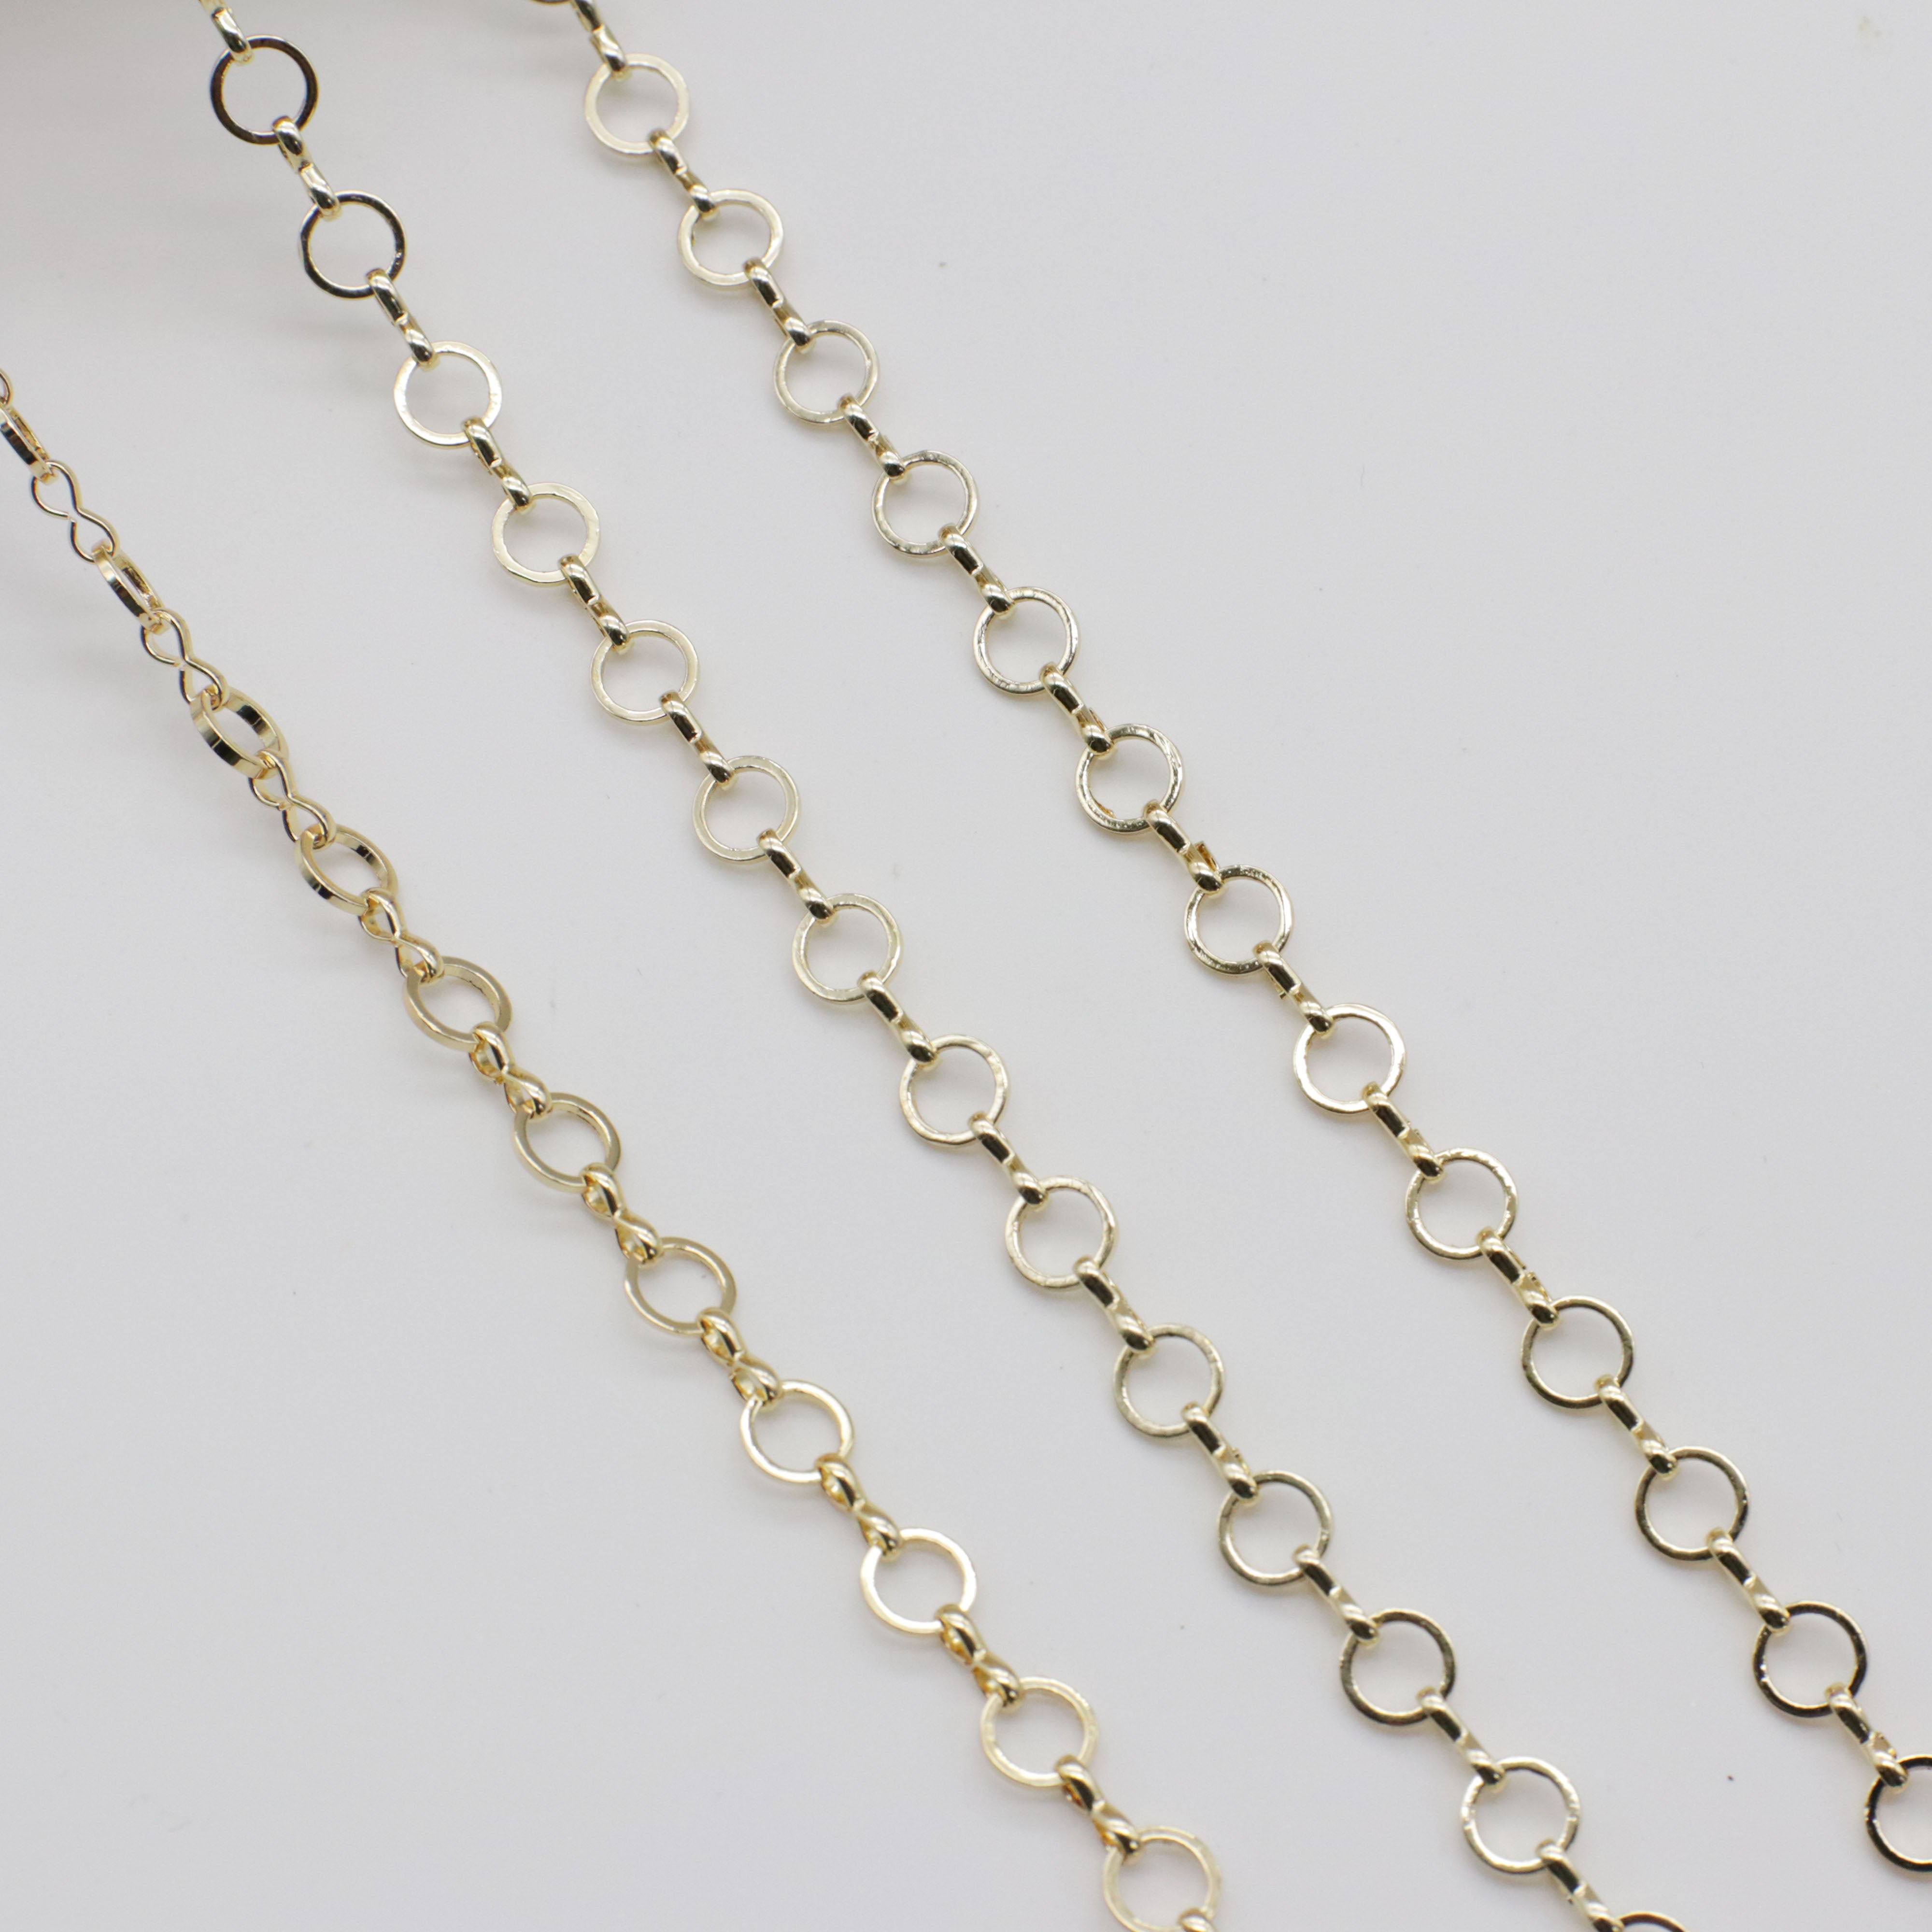 7MM Brass Circle Link Chain 1 mm Thickness Wire Hand Made Gold Plated For Jewelry Design